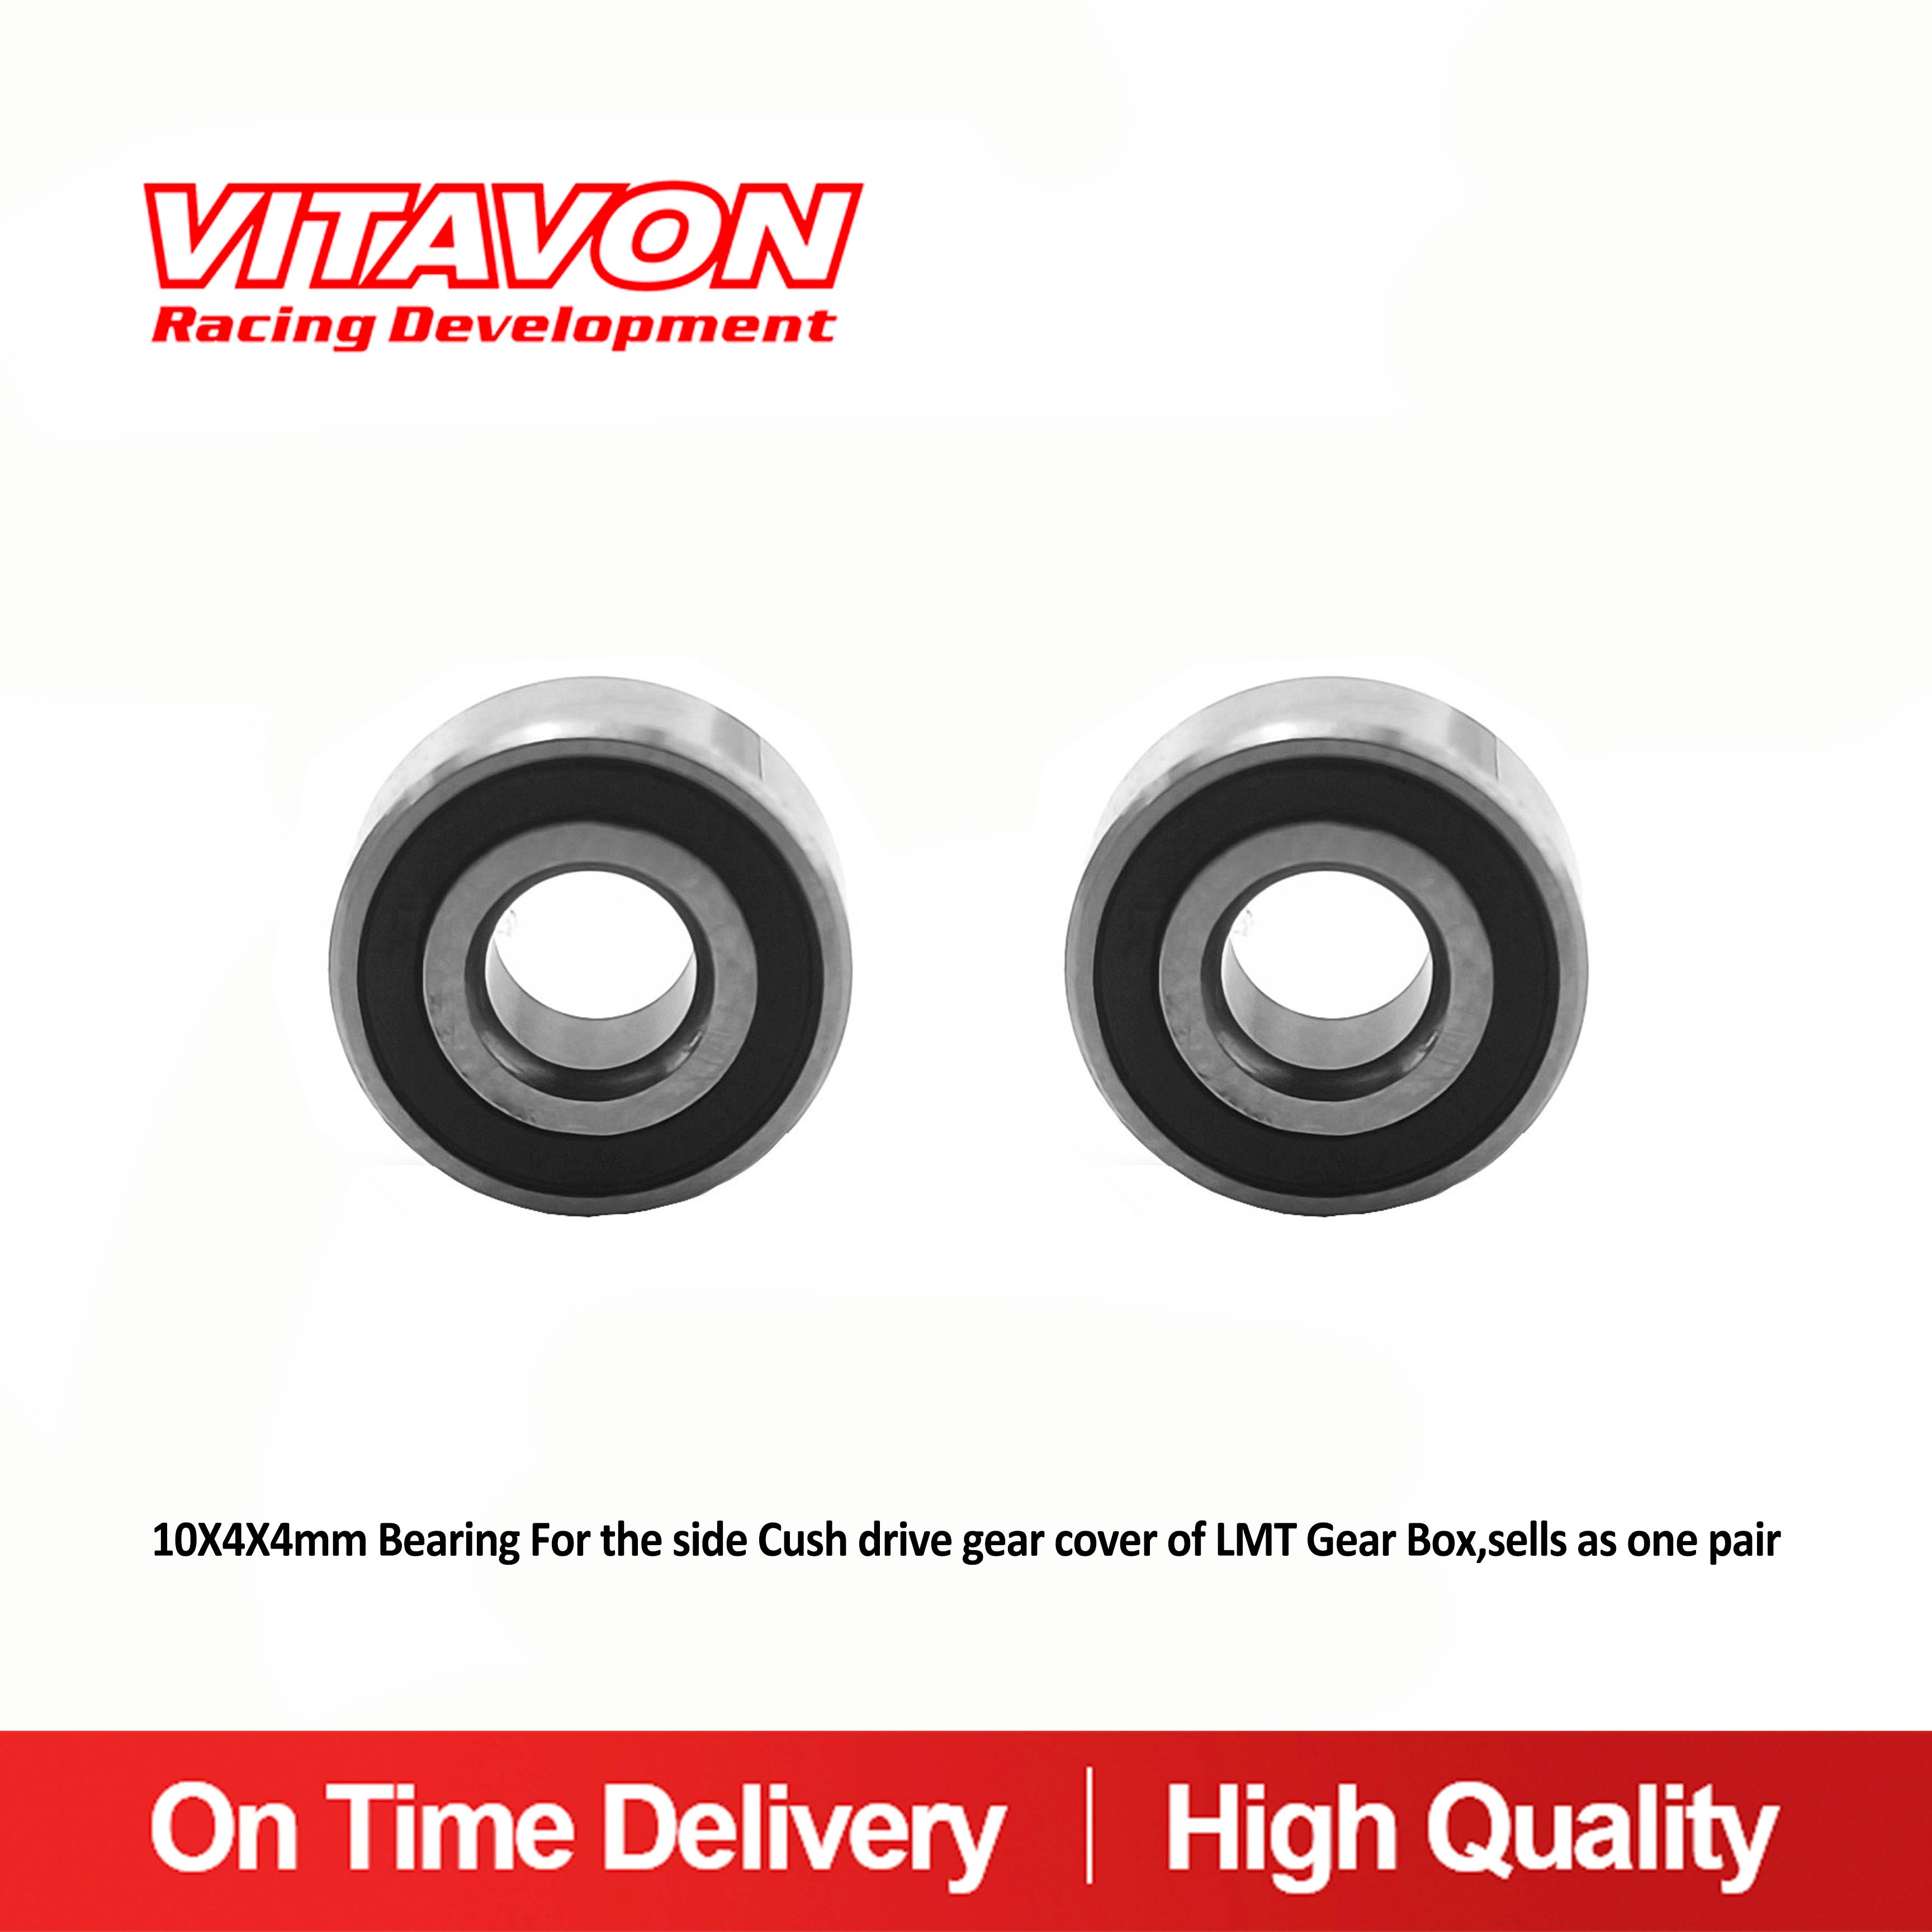 10X4X4mm Bearing For the side Cush drive gear cover of LMT Gear Box,sells as one pair